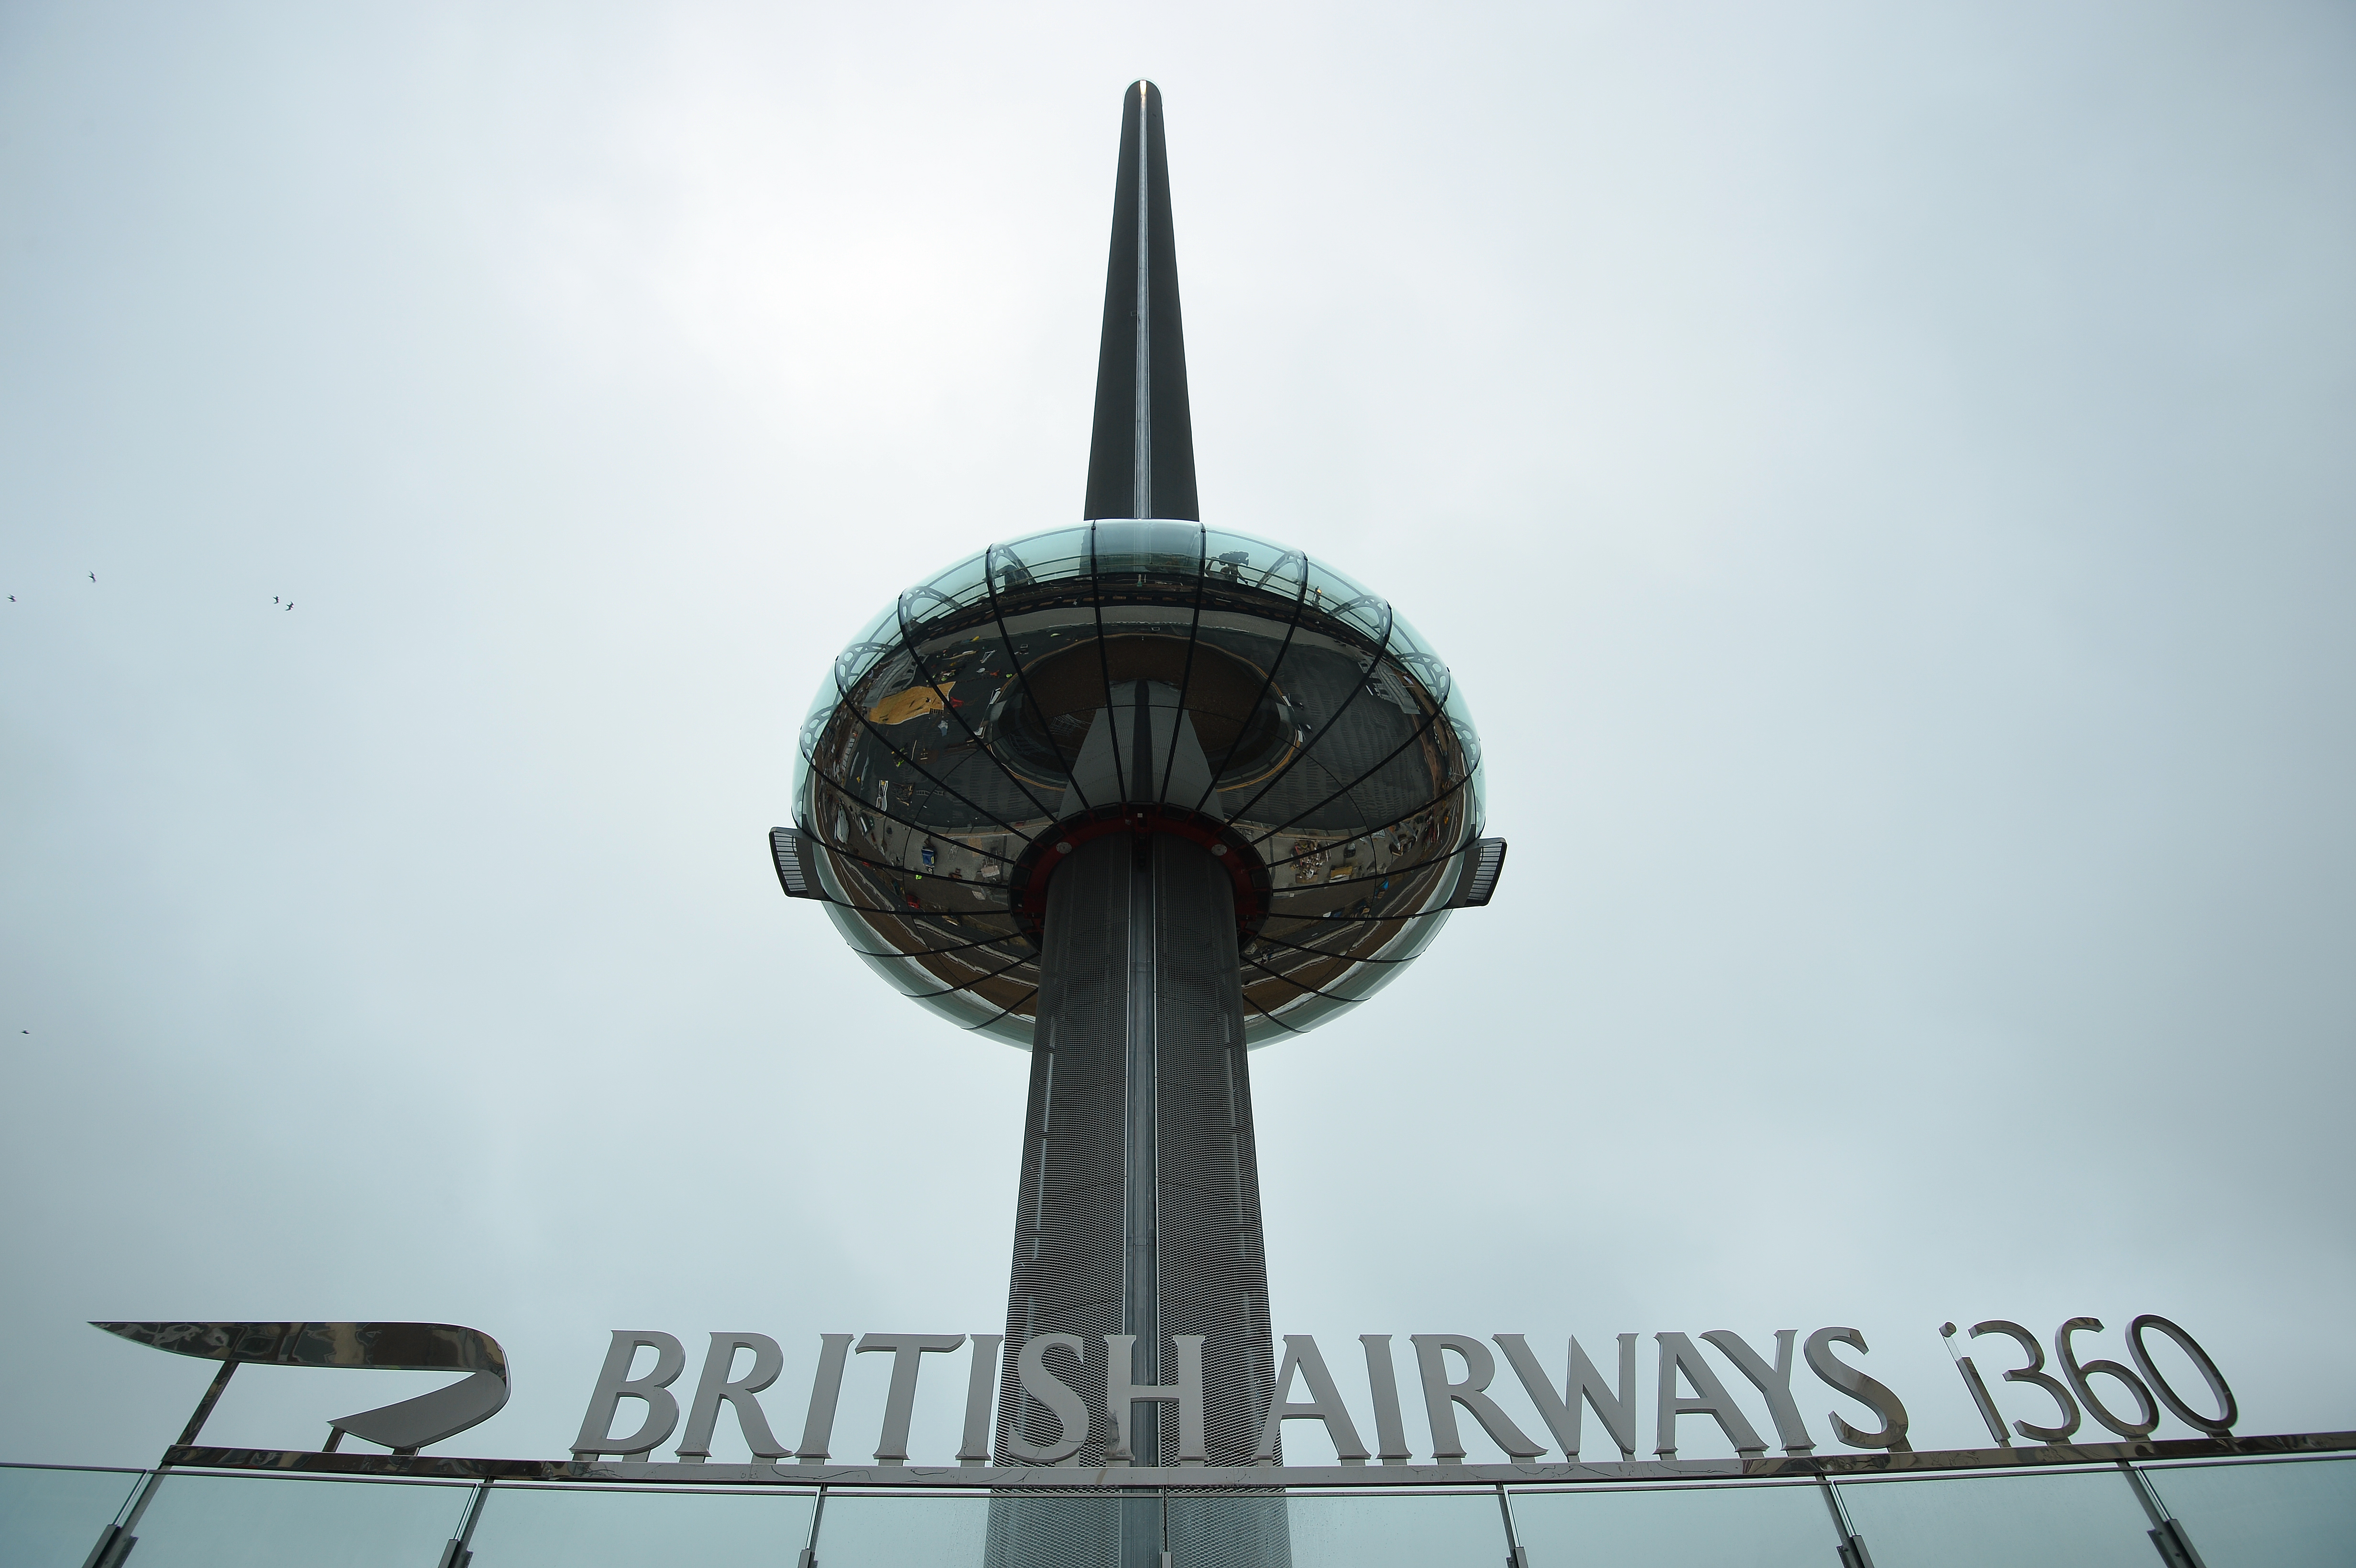 The British Airways i360 Observation Tower is pictured during a preview in Brighton, on the south coast of England, on August 2, 2016.  The verticle cable car that ascends to a height of 450 feet (132 metres) affords 360-degree views of up to 26 miles, according to the attractions website. The observation tower opens officially on August 4, 2016.  / AFP PHOTO / GLYN KIRK